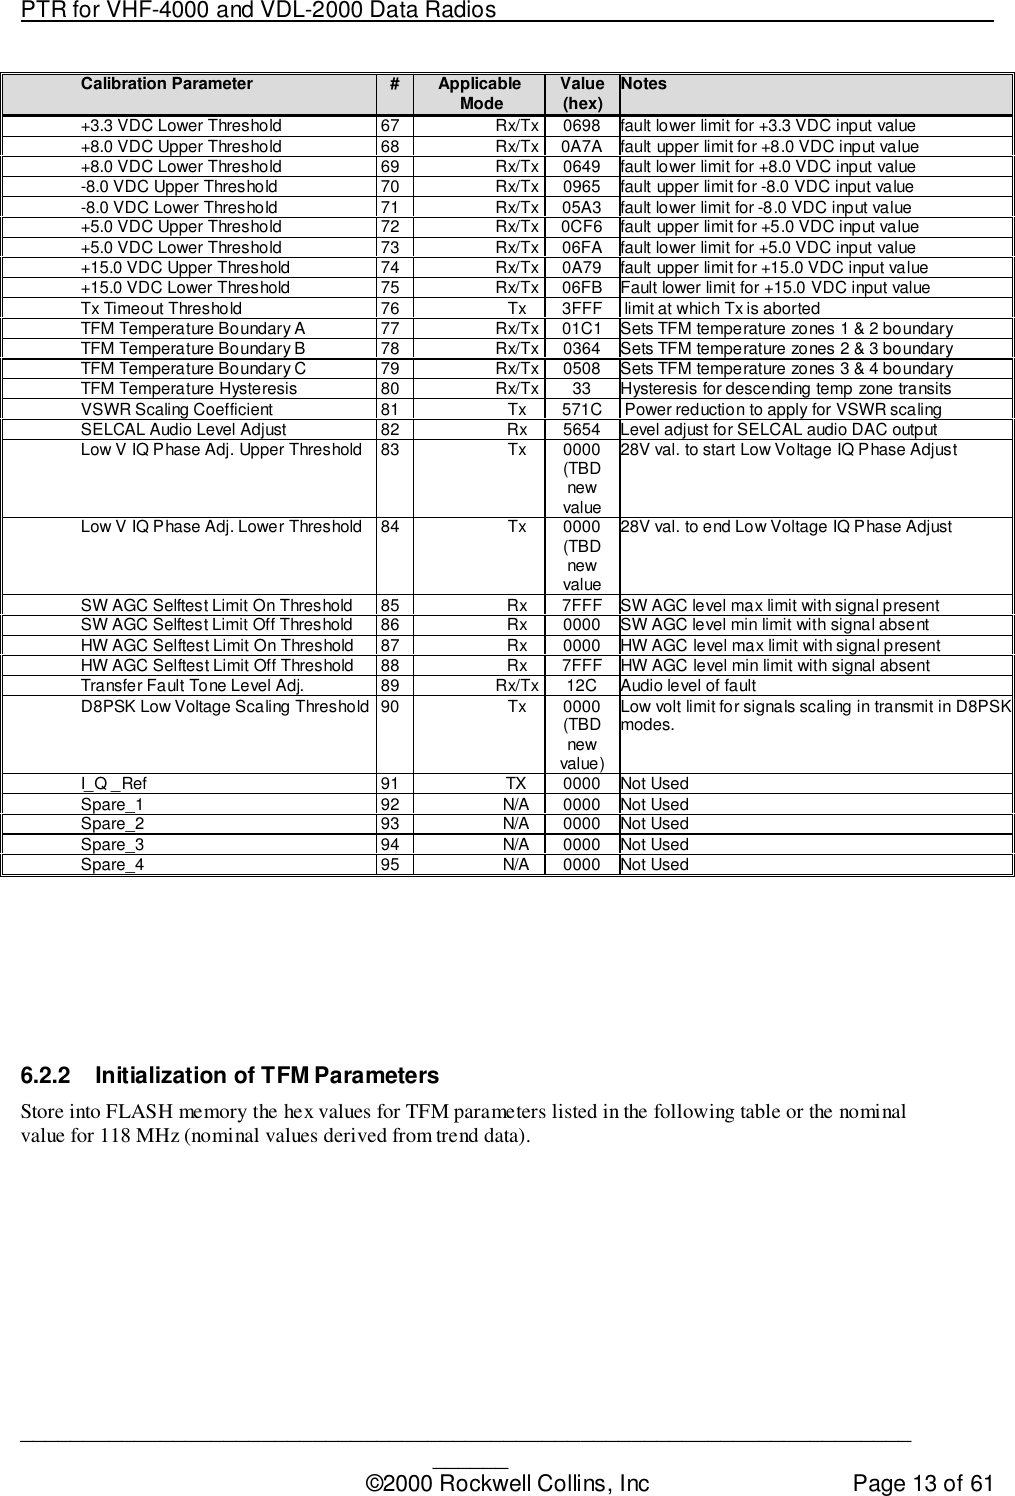 PTR for VHF-4000 and VDL-2000 Data Radios                                                                                ____________________________________________________________________________©2000 Rockwell Collins, Inc Page 13 of 61Calibration Parameter #Applicable Mode Value(hex) Notes+3.3 VDC Lower Threshold 67 Rx/Tx 0698 fault lower limit for +3.3 VDC input value+8.0 VDC Upper Threshold 68 Rx/Tx 0A7A fault upper limit for +8.0 VDC input value+8.0 VDC Lower Threshold 69 Rx/Tx 0649 fault lower limit for +8.0 VDC input value-8.0 VDC Upper Threshold 70 Rx/Tx 0965 fault upper limit for -8.0 VDC input value-8.0 VDC Lower Threshold 71 Rx/Tx 05A3 fault lower limit for -8.0 VDC input value+5.0 VDC Upper Threshold 72 Rx/Tx 0CF6 fault upper limit for +5.0 VDC input value+5.0 VDC Lower Threshold 73 Rx/Tx 06FA fault lower limit for +5.0 VDC input value+15.0 VDC Upper Threshold 74 Rx/Tx 0A79 fault upper limit for +15.0 VDC input value+15.0 VDC Lower Threshold 75 Rx/Tx 06FB Fault lower limit for +15.0 VDC input valueTx Timeout Threshold 76 Tx 3FFF limit at which Tx is abortedTFM Temperature Boundary A 77 Rx/Tx 01C1 Sets TFM temperature zones 1 &amp; 2 boundaryTFM Temperature Boundary B 78 Rx/Tx 0364 Sets TFM temperature zones 2 &amp; 3 boundaryTFM Temperature Boundary C 79 Rx/Tx 0508 Sets TFM temperature zones 3 &amp; 4 boundaryTFM Temperature Hysteresis 80 Rx/Tx 33 Hysteresis for descending temp zone transitsVSWR Scaling Coefficient 81 Tx 571C Power reduction to apply for VSWR scalingSELCAL Audio Level Adjust 82 Rx 5654 Level adjust for SELCAL audio DAC outputLow V IQ Phase Adj. Upper Threshold 83 Tx 0000(TBDnewvalue28V val. to start Low Voltage IQ Phase AdjustLow V IQ Phase Adj. Lower Threshold 84 Tx 0000(TBDnewvalue28V val. to end Low Voltage IQ Phase AdjustSW AGC Selftest Limit On Threshold 85 Rx 7FFF SW AGC level max limit with signal presentSW AGC Selftest Limit Off Threshold 86 Rx 0000 SW AGC level min limit with signal absentHW AGC Selftest Limit On Threshold 87 Rx 0000 HW AGC level max limit with signal presentHW AGC Selftest Limit Off Threshold 88 Rx 7FFF HW AGC level min limit with signal absentTransfer Fault Tone Level Adj. 89 Rx/Tx 12C Audio level of faultD8PSK Low Voltage Scaling Threshold 90 Tx 0000(TBDnewvalue )Low volt limit for signals scaling in transmit in D8PSKmodes.I_Q _Ref 91 TX 0000 Not UsedSpare_1 92 N/A 0000 Not UsedSpare_2 93 N/A 0000 Not UsedSpare_3 94 N/A 0000 Not UsedSpare_4 95 N/A 0000 Not Used6.2.2  Initialization of TFM ParametersStore into FLASH memory the hex values for TFM parameters listed in the following table or the nominalvalue for 118 MHz (nominal values derived from trend data).